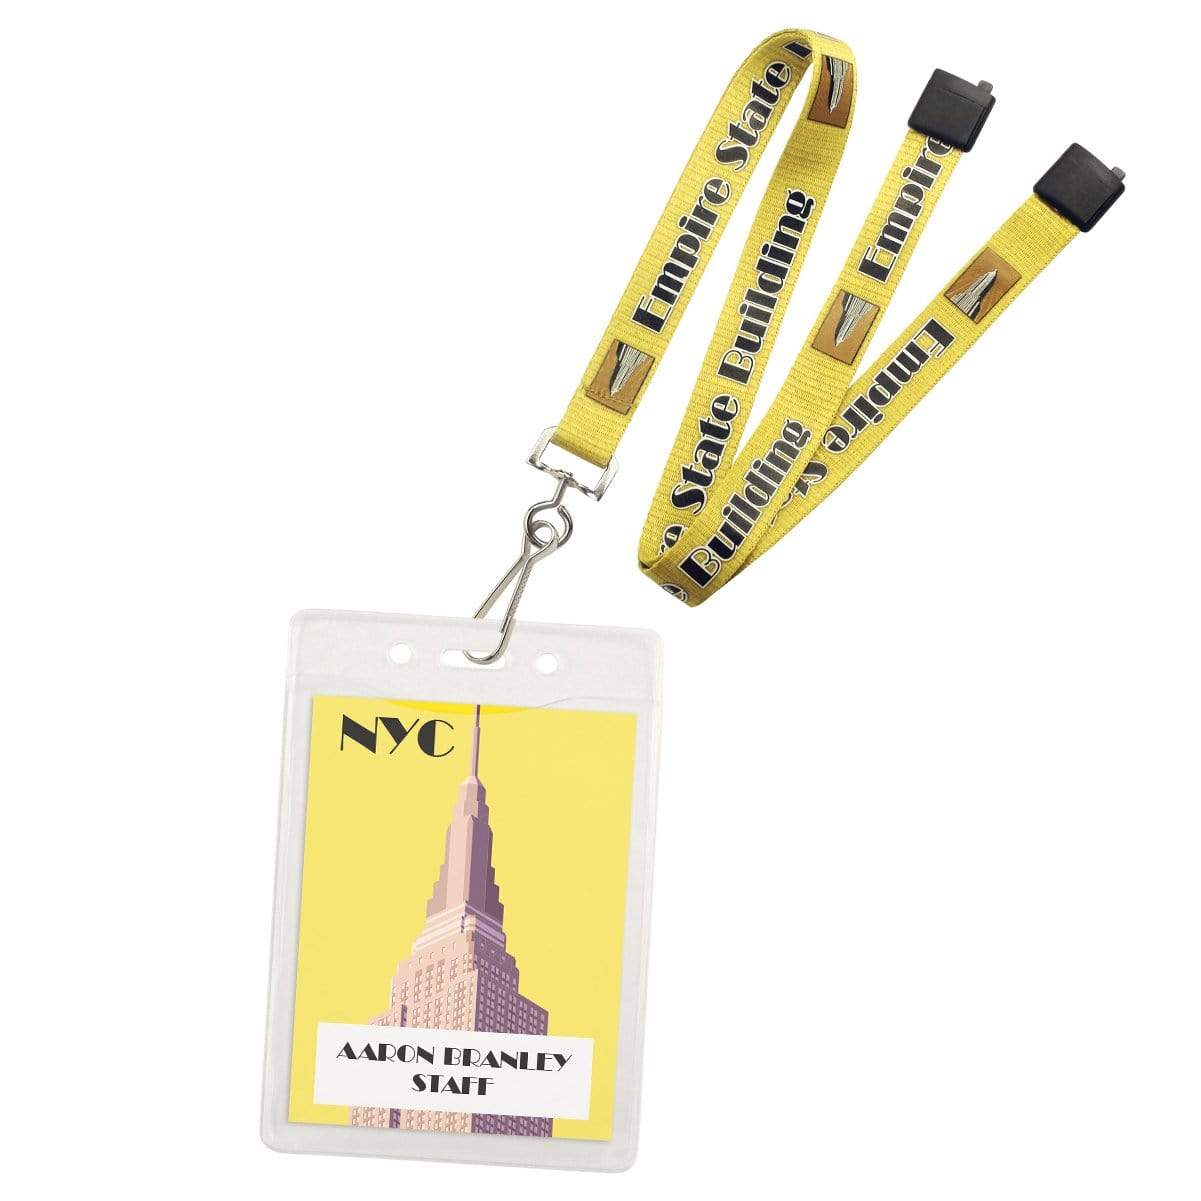 Heavy Duty 3 x 4 Name Badge Holder - 3x4 Vertical Textured Convention Conference Card Protector (p/n 1815-1450)